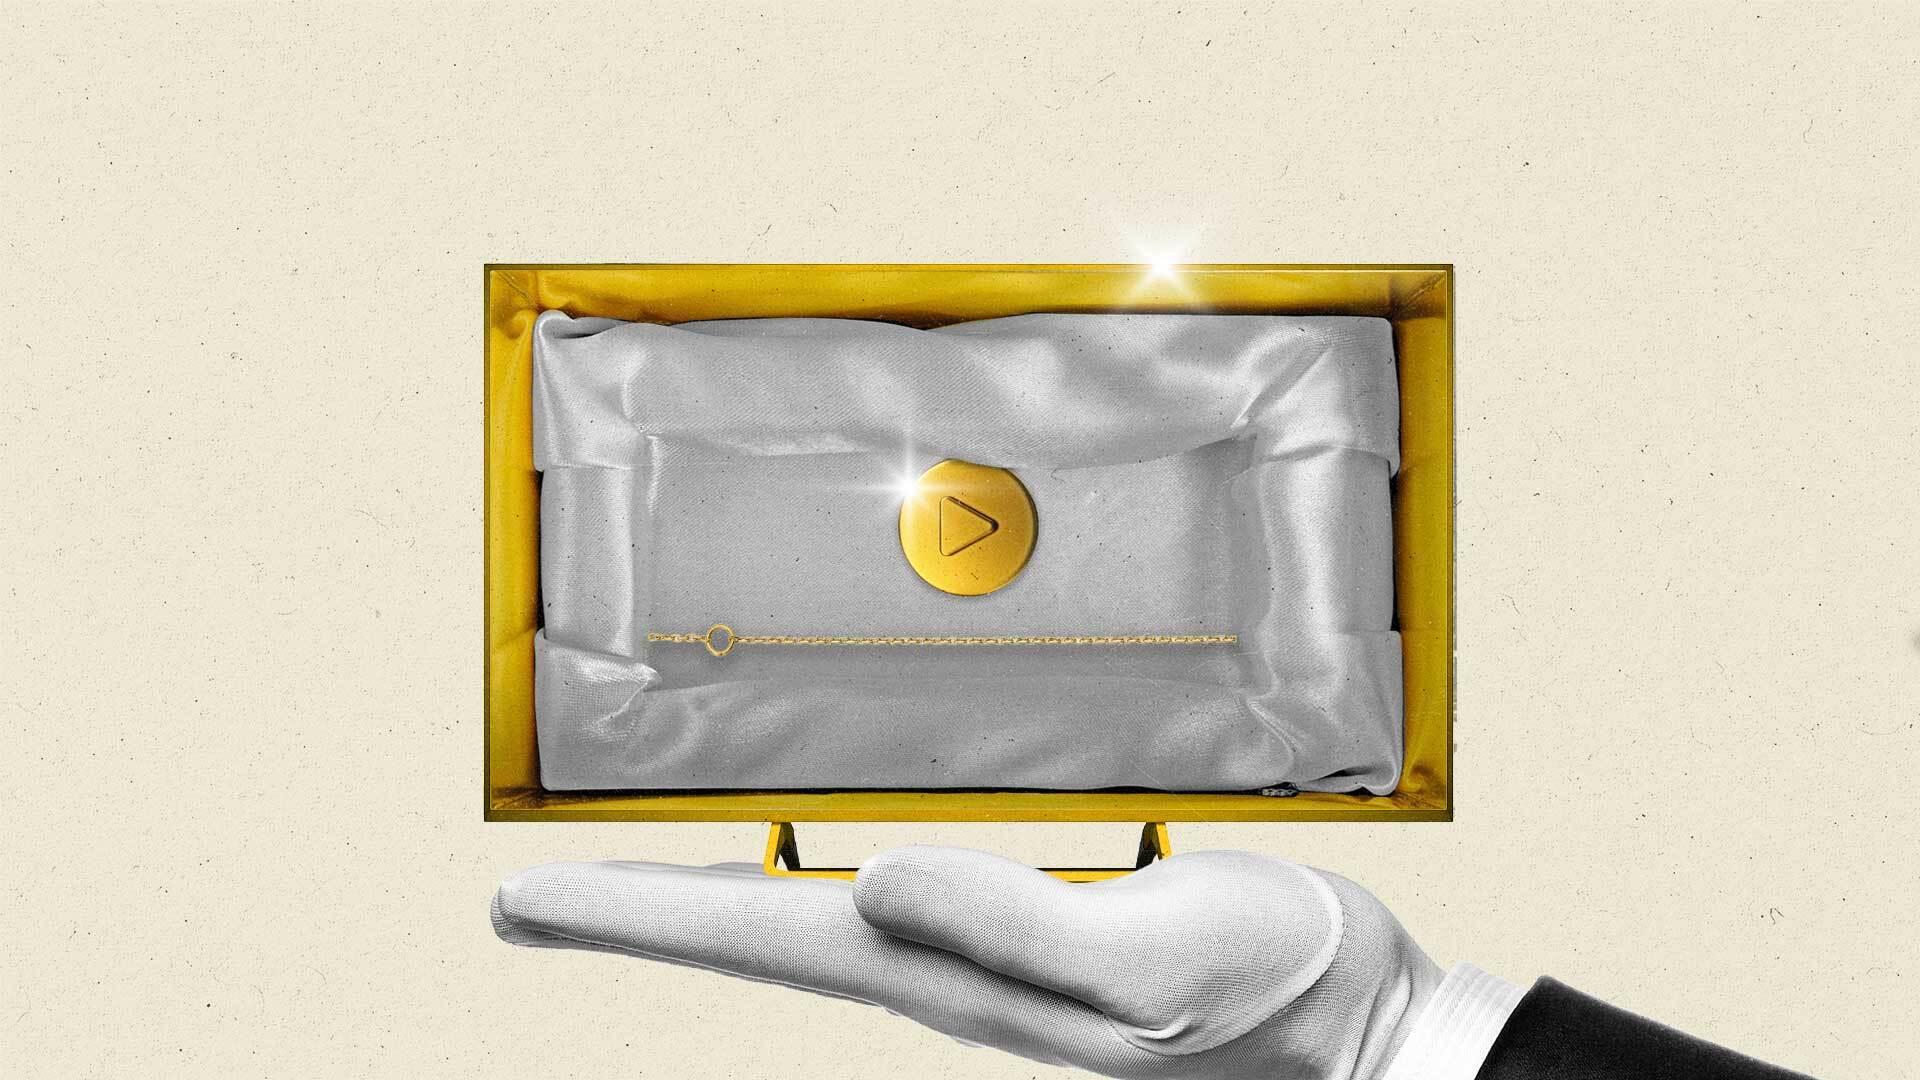 A hand with a white linen glove balances a golden CTV with a gold chain progress bar and a gold play button inset in satin.